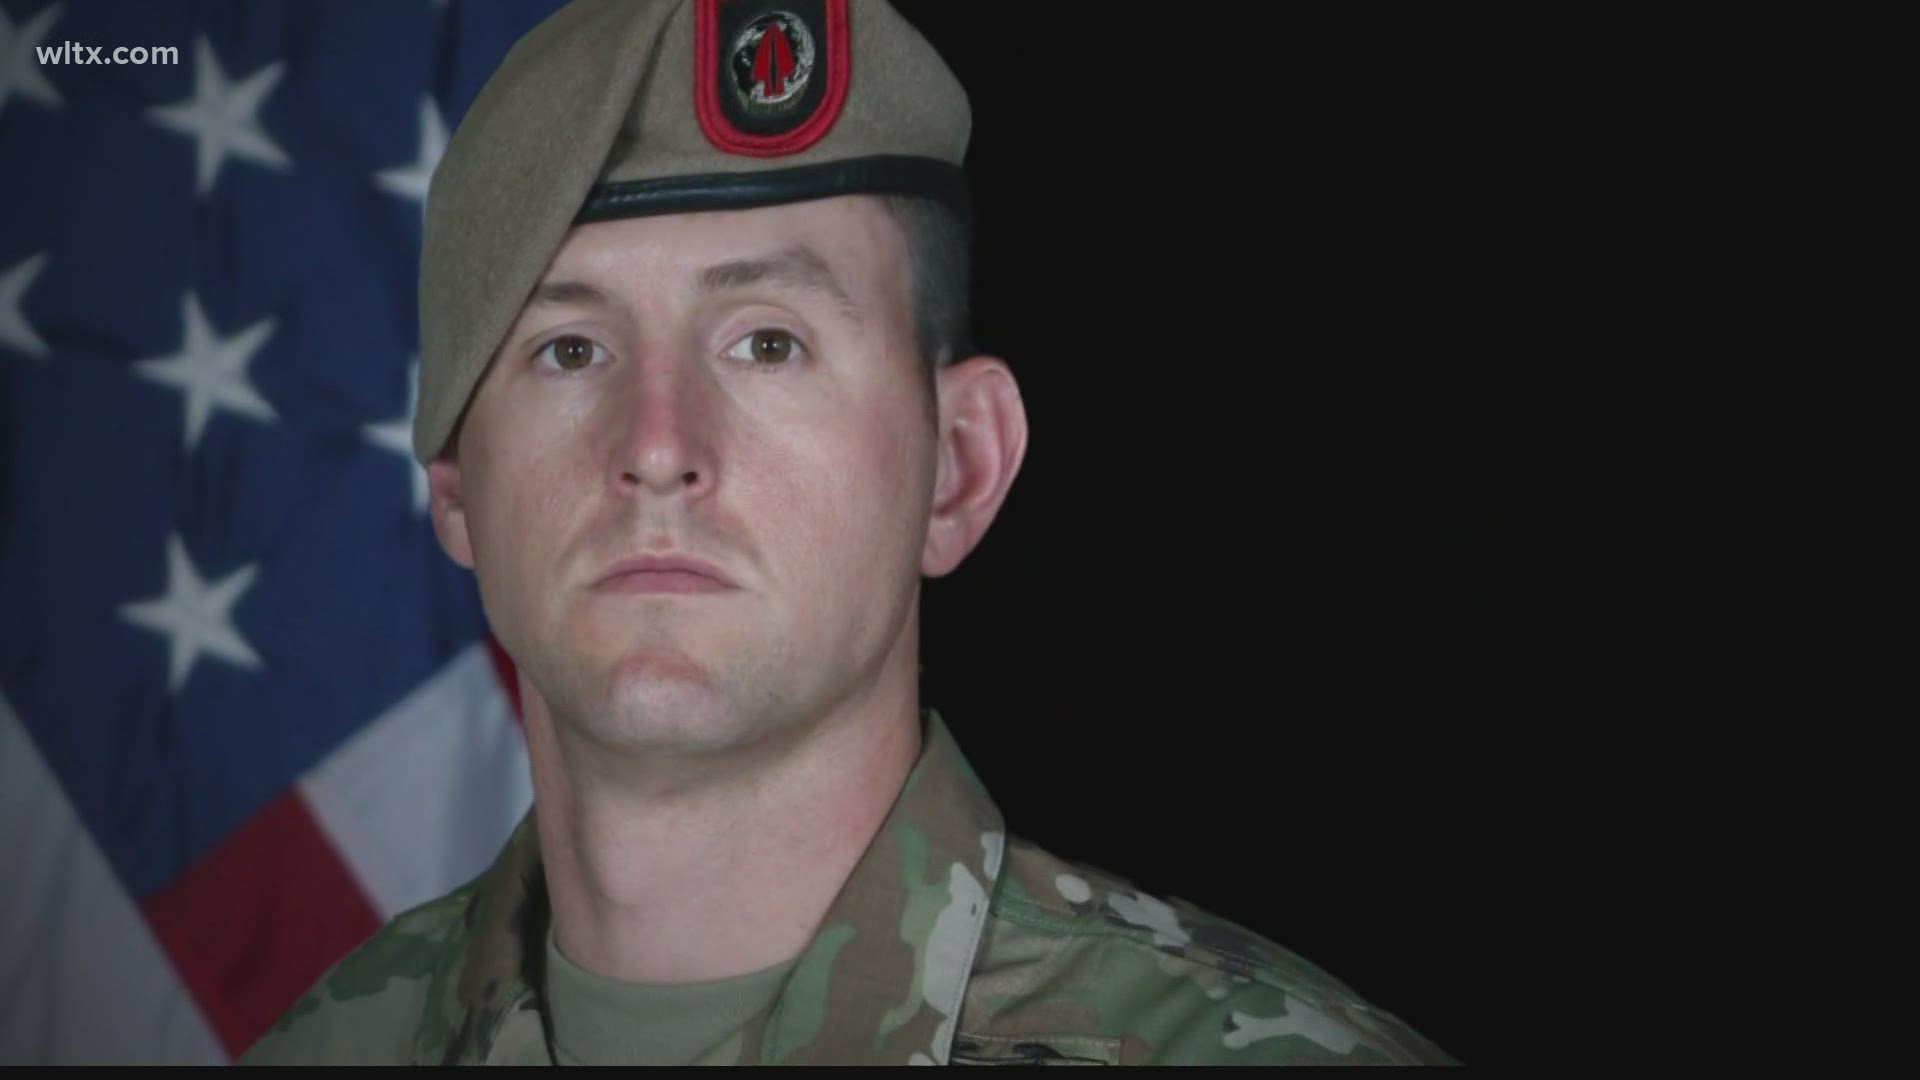 Sergeant Major Thomas Payne, a South Carolina native, is set to receive the Medal of Honor for actions during a daring 2015 raid where he rescued 70 hostages.